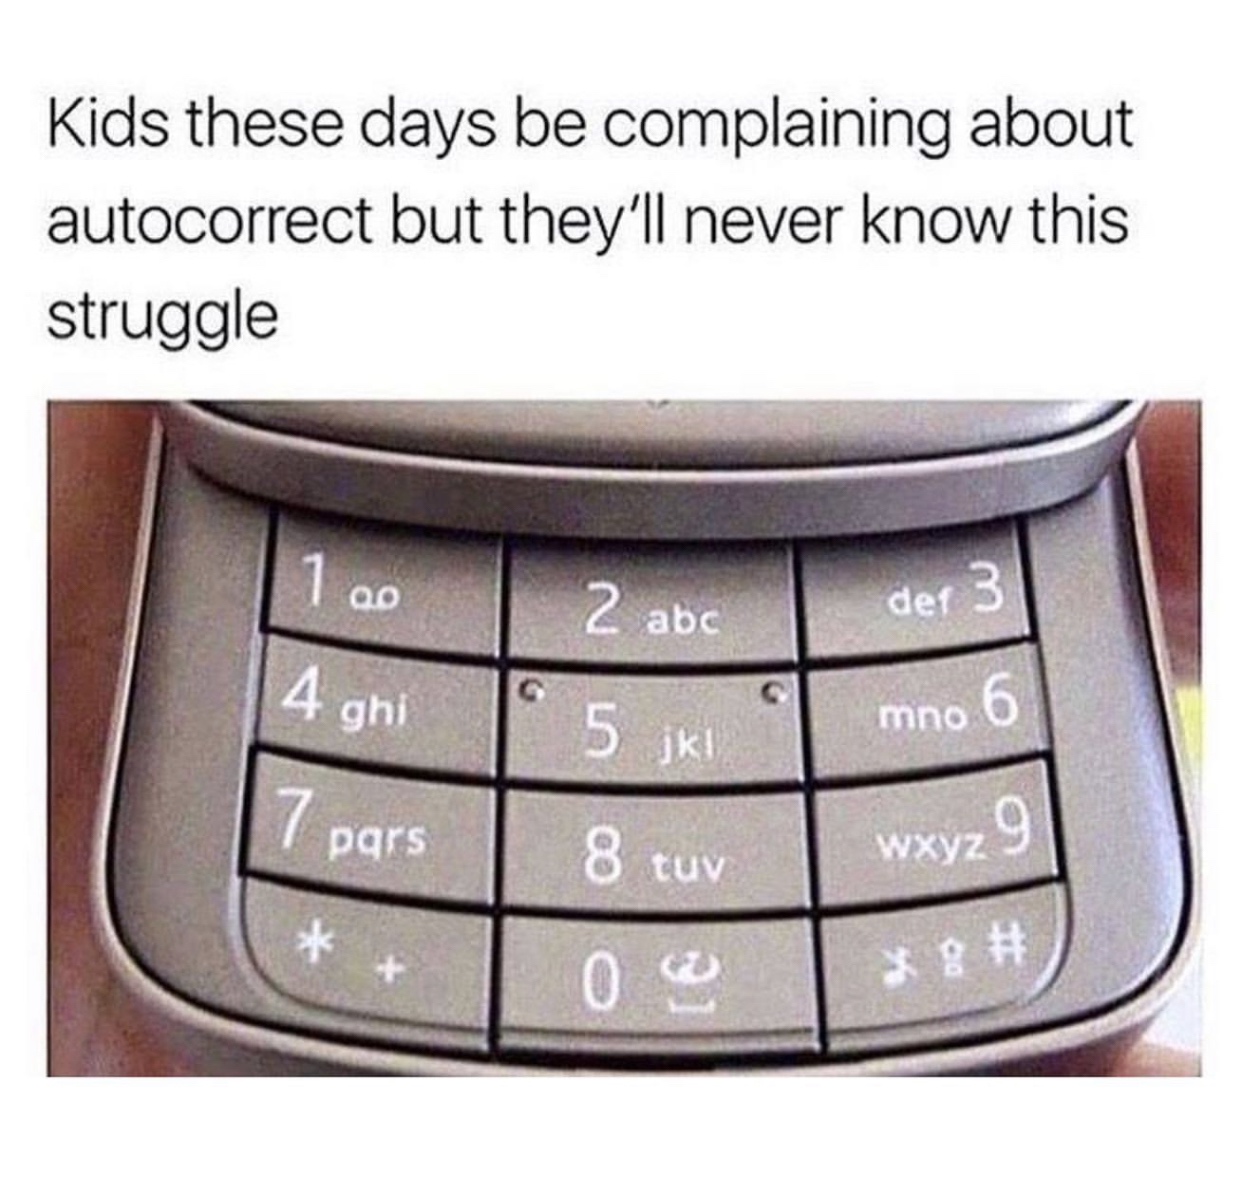 nokia - Kids these days be complaining about autocorrect but they'll never know this struggle 1 20 2 abc 4 ghi 1 5 ki der 3 mno 6 pars wxyz 9 8 tuv 0